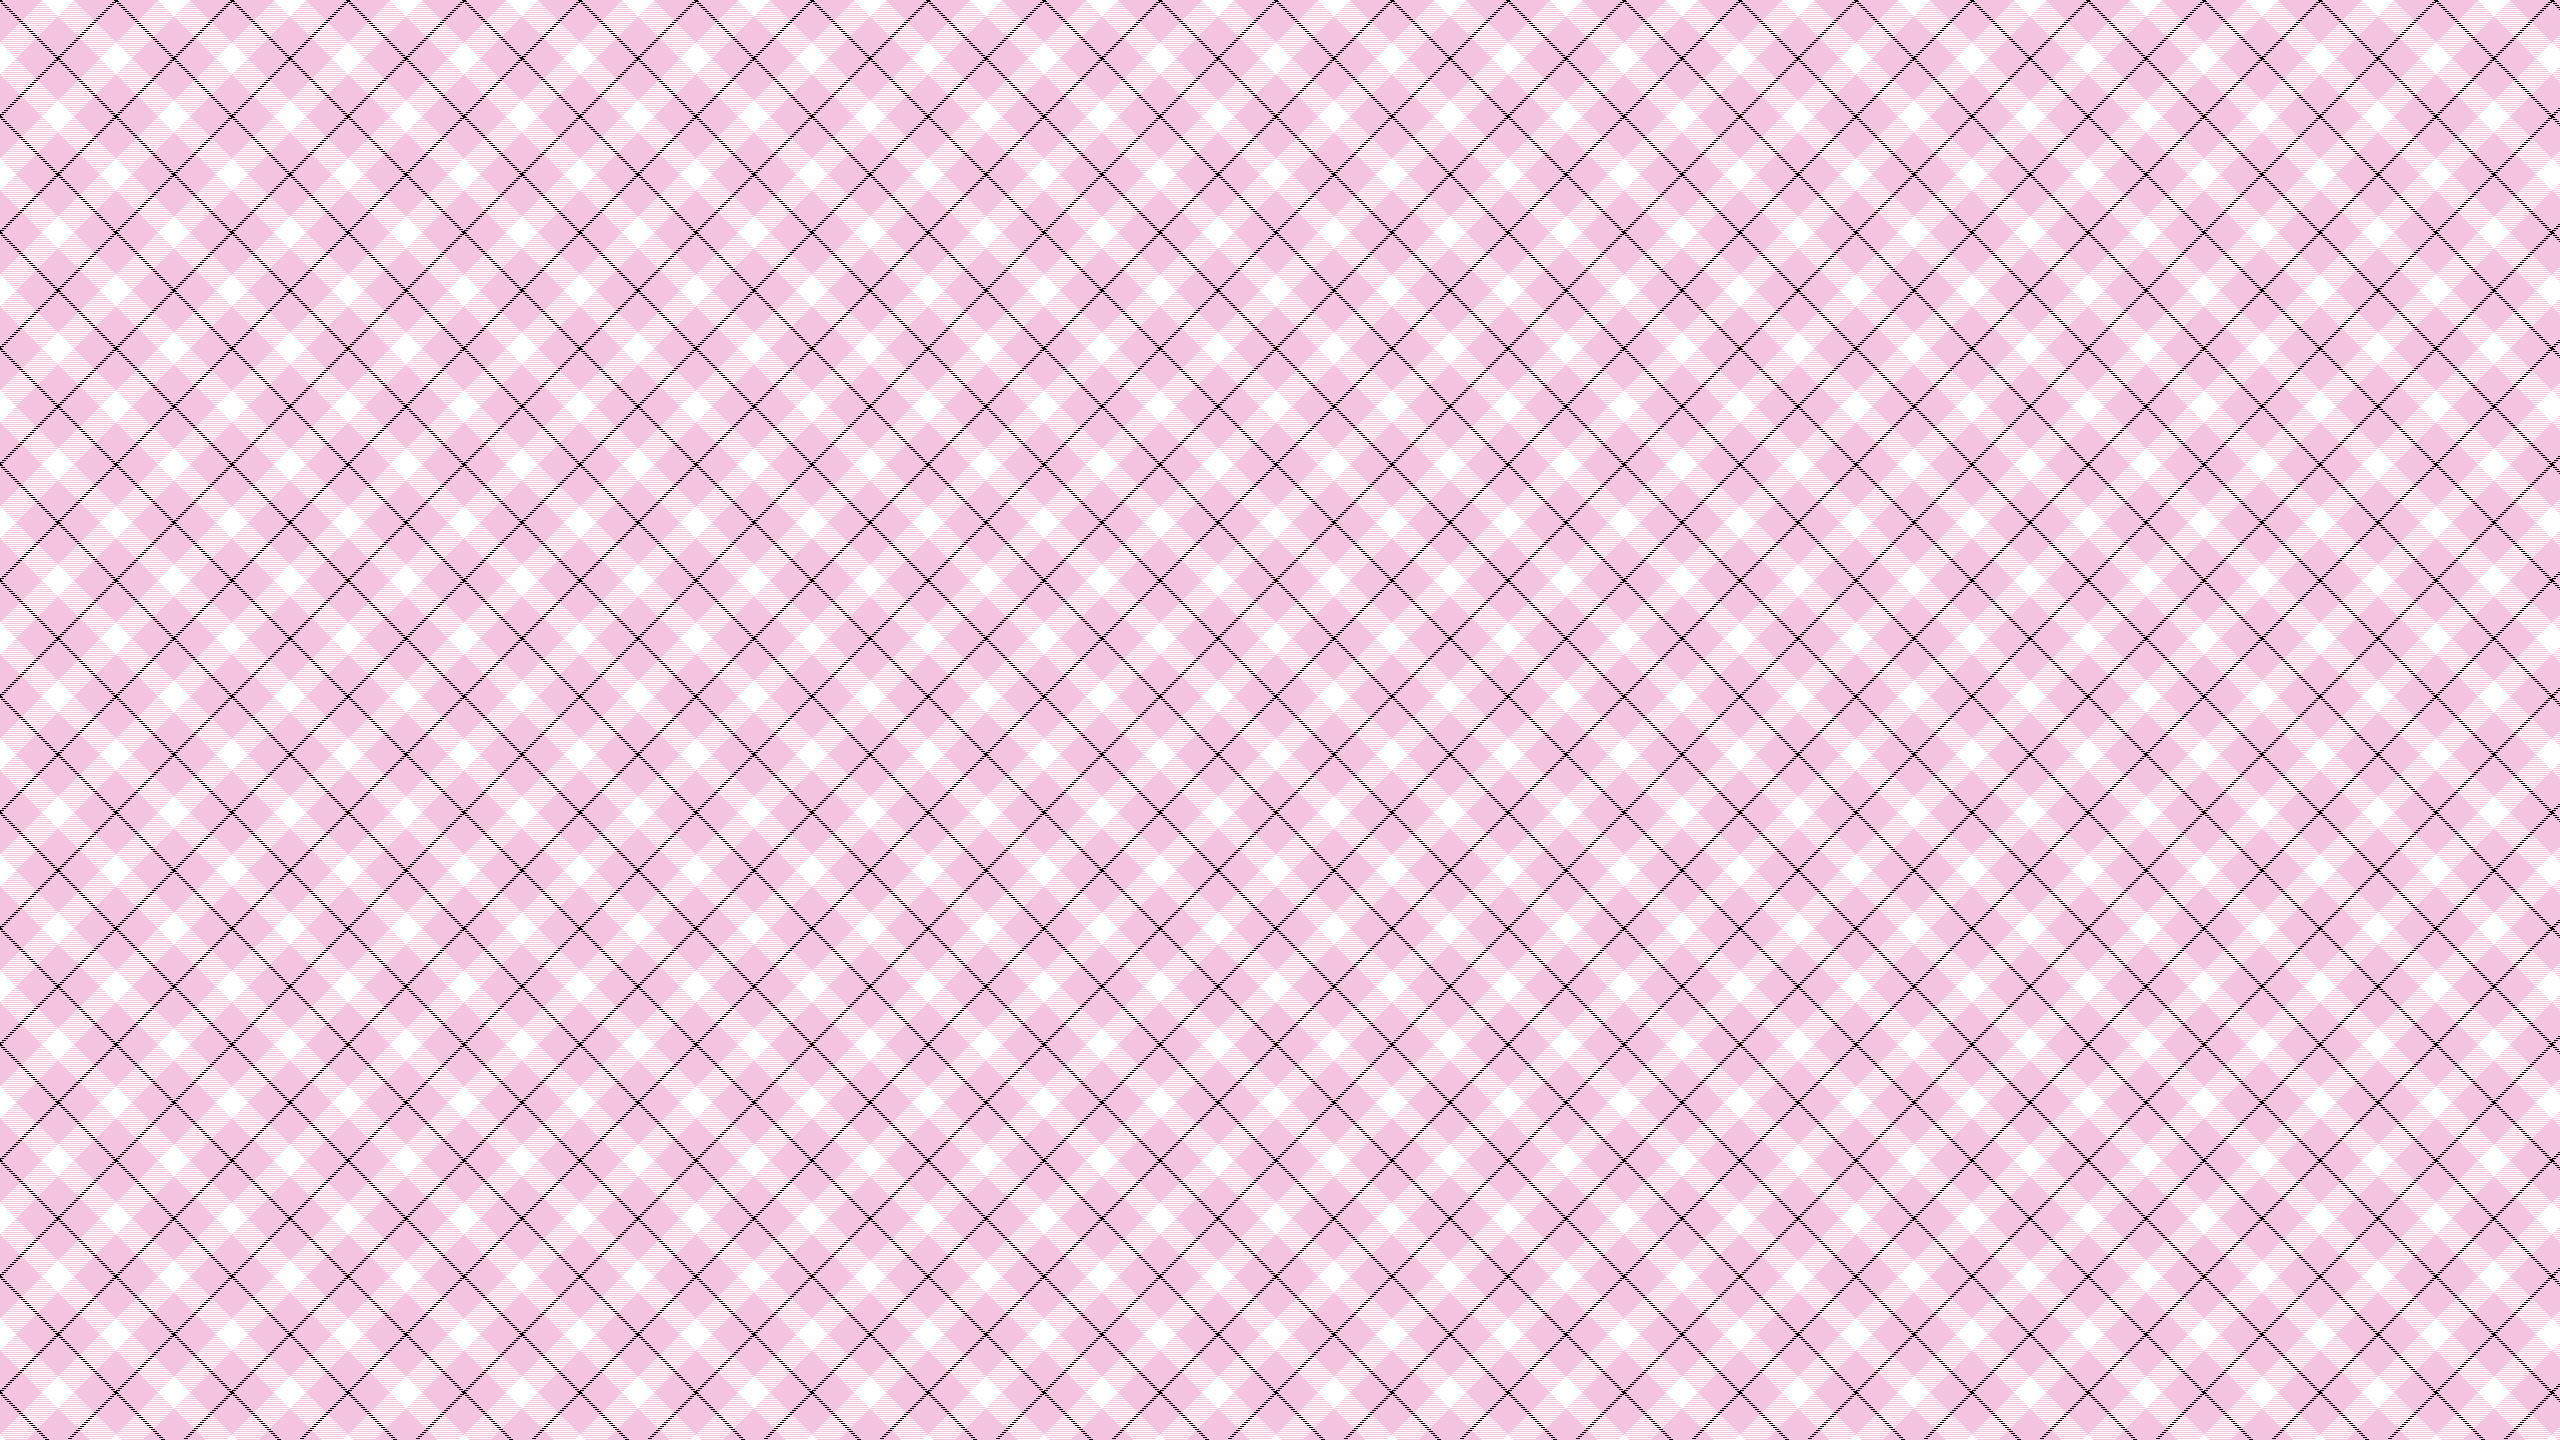 this Pink Plaid Desktop Wallpaper is easy Just save the wallpaper